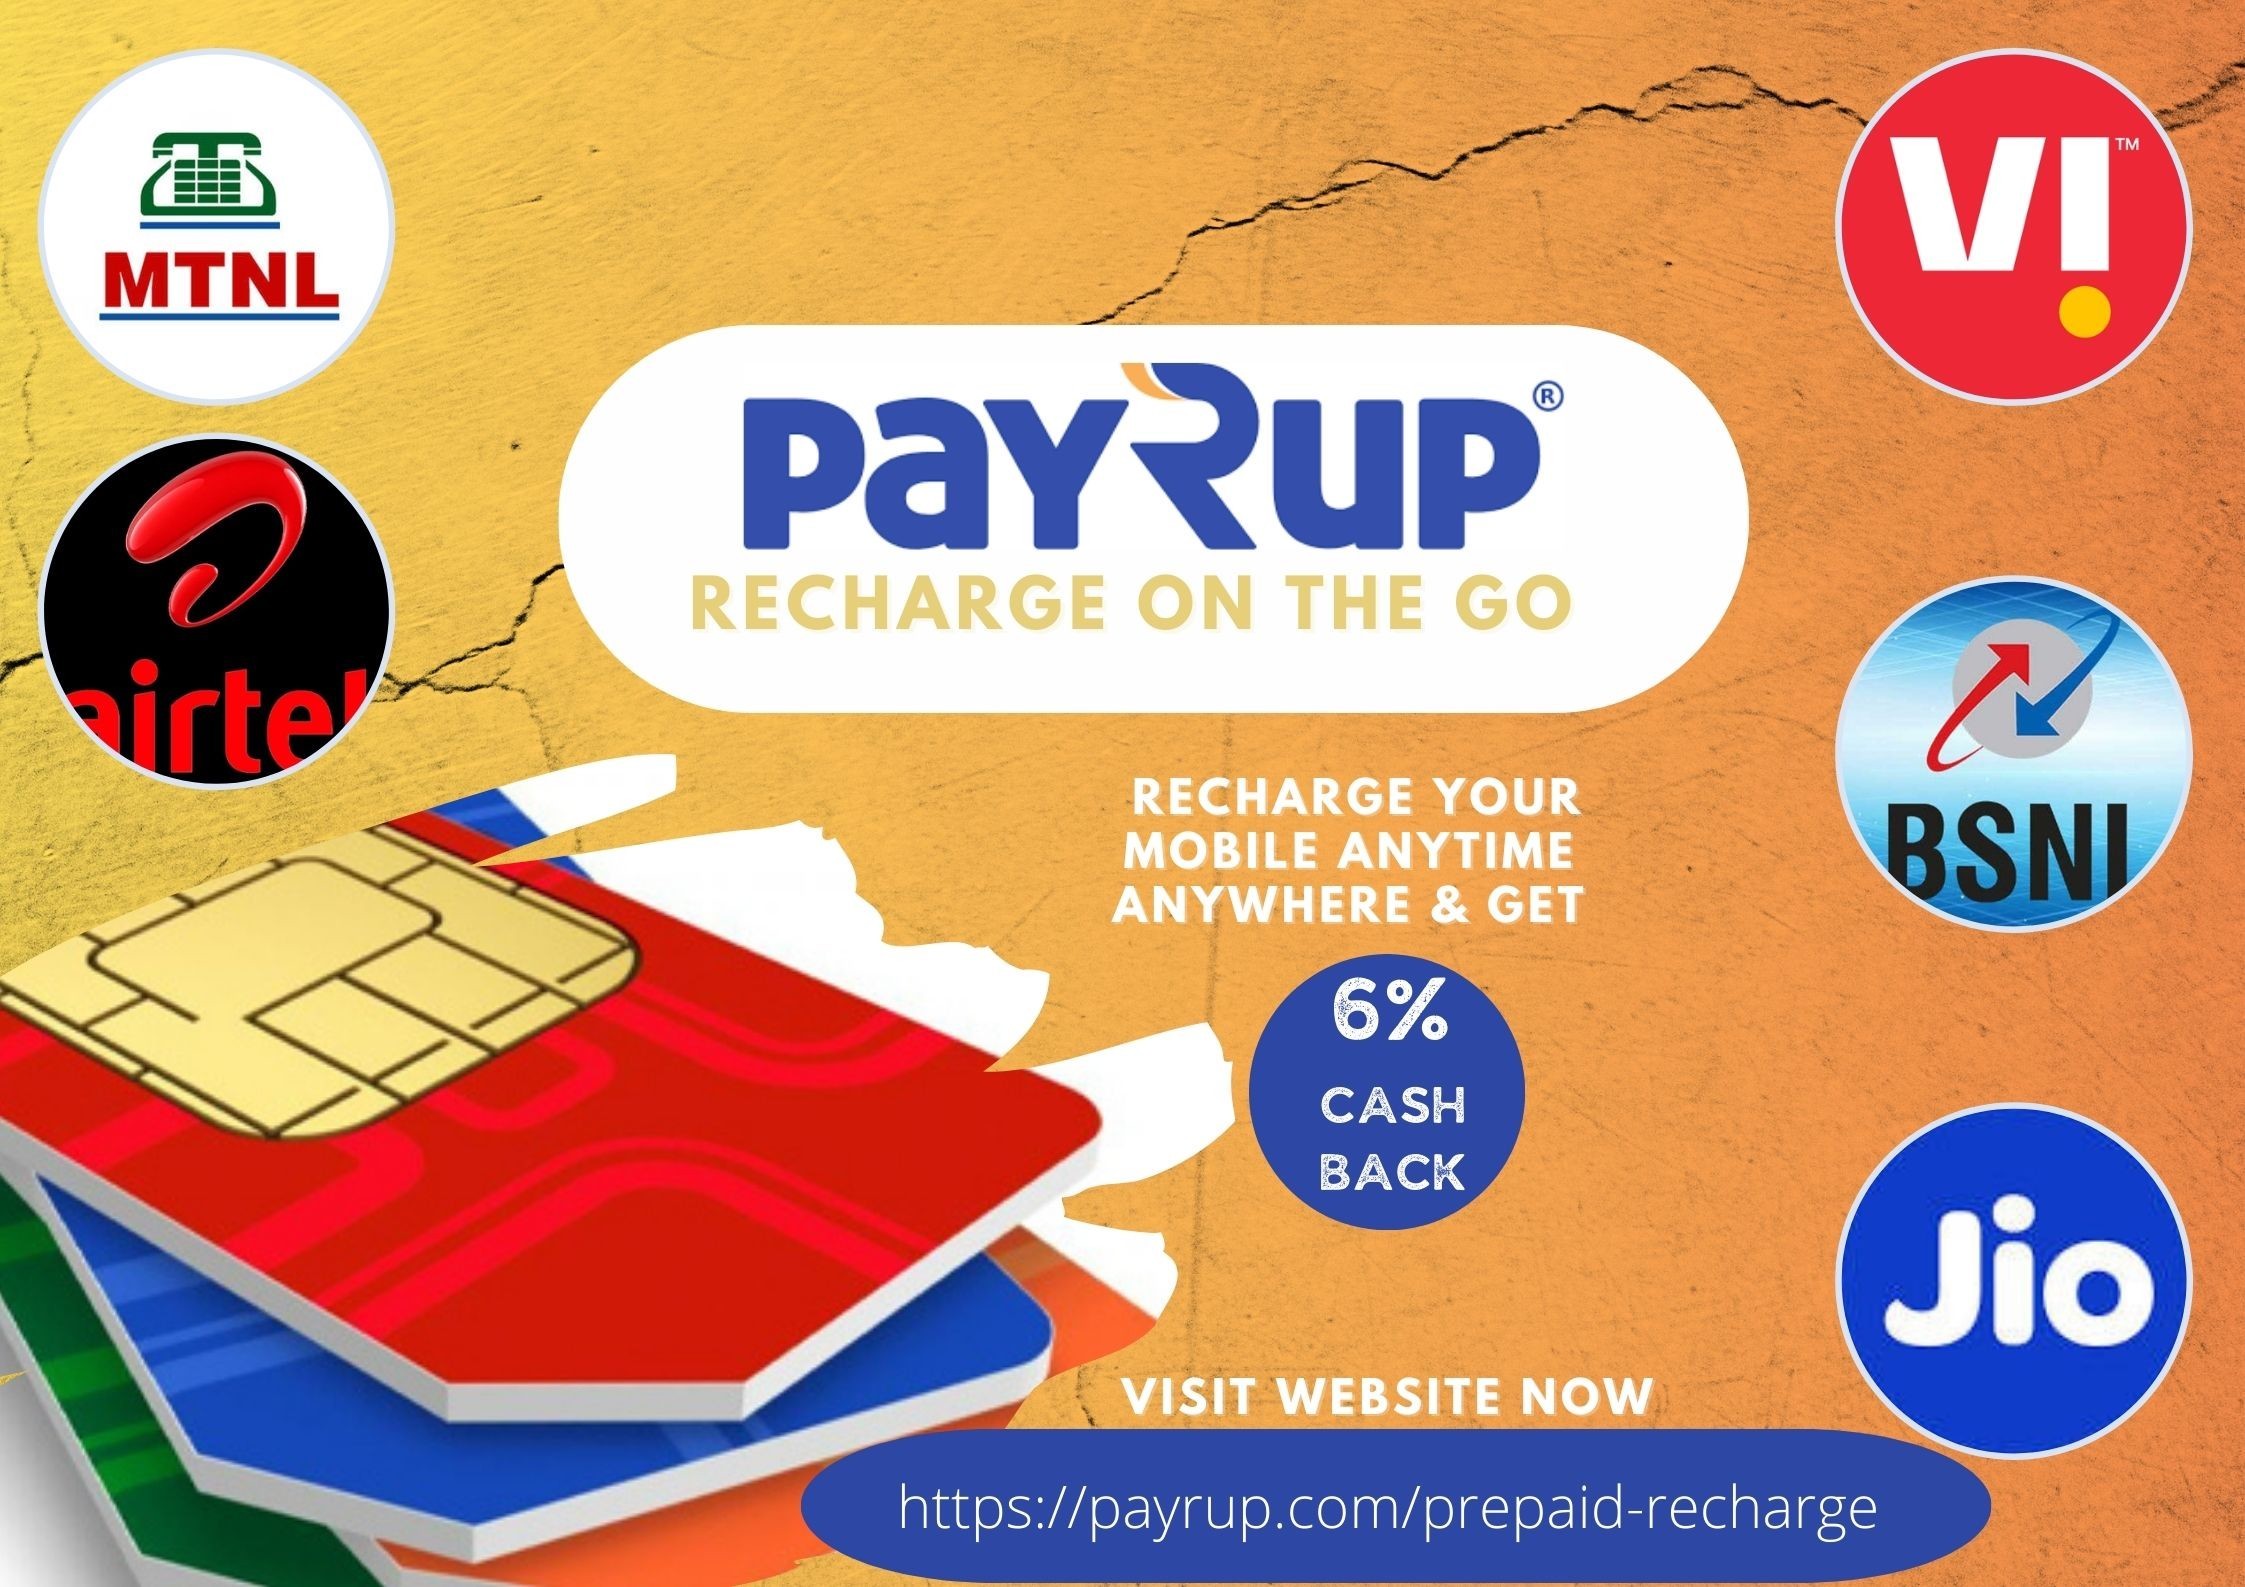 Your Trusted Mobile Prepaid Recharge Service